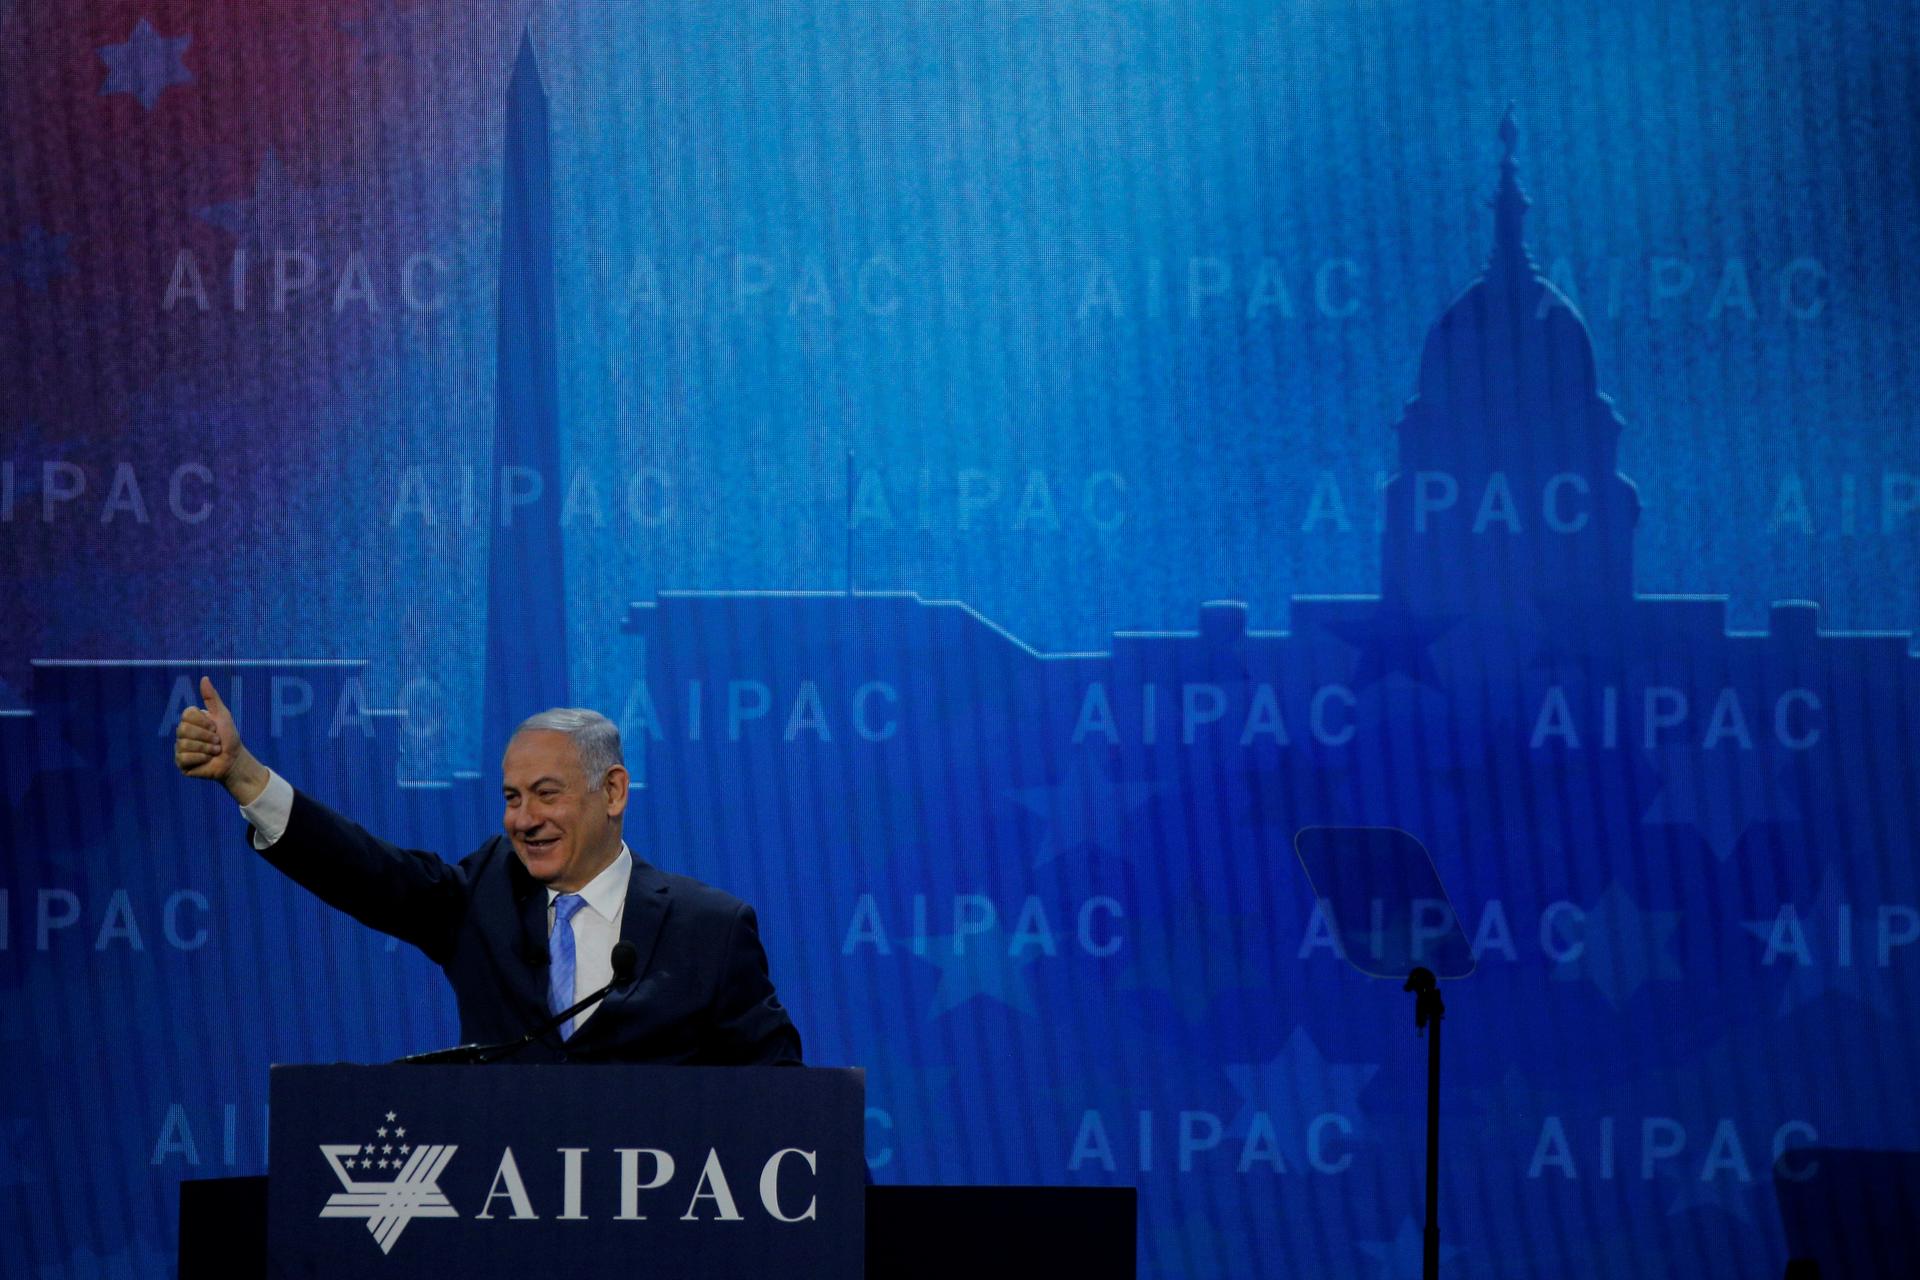 Israeli Prime Minister Benjamin Netanyahu takes the stage to speak at the AIPAC policy conference in Washington, DC, U.S., March 6, 2018.